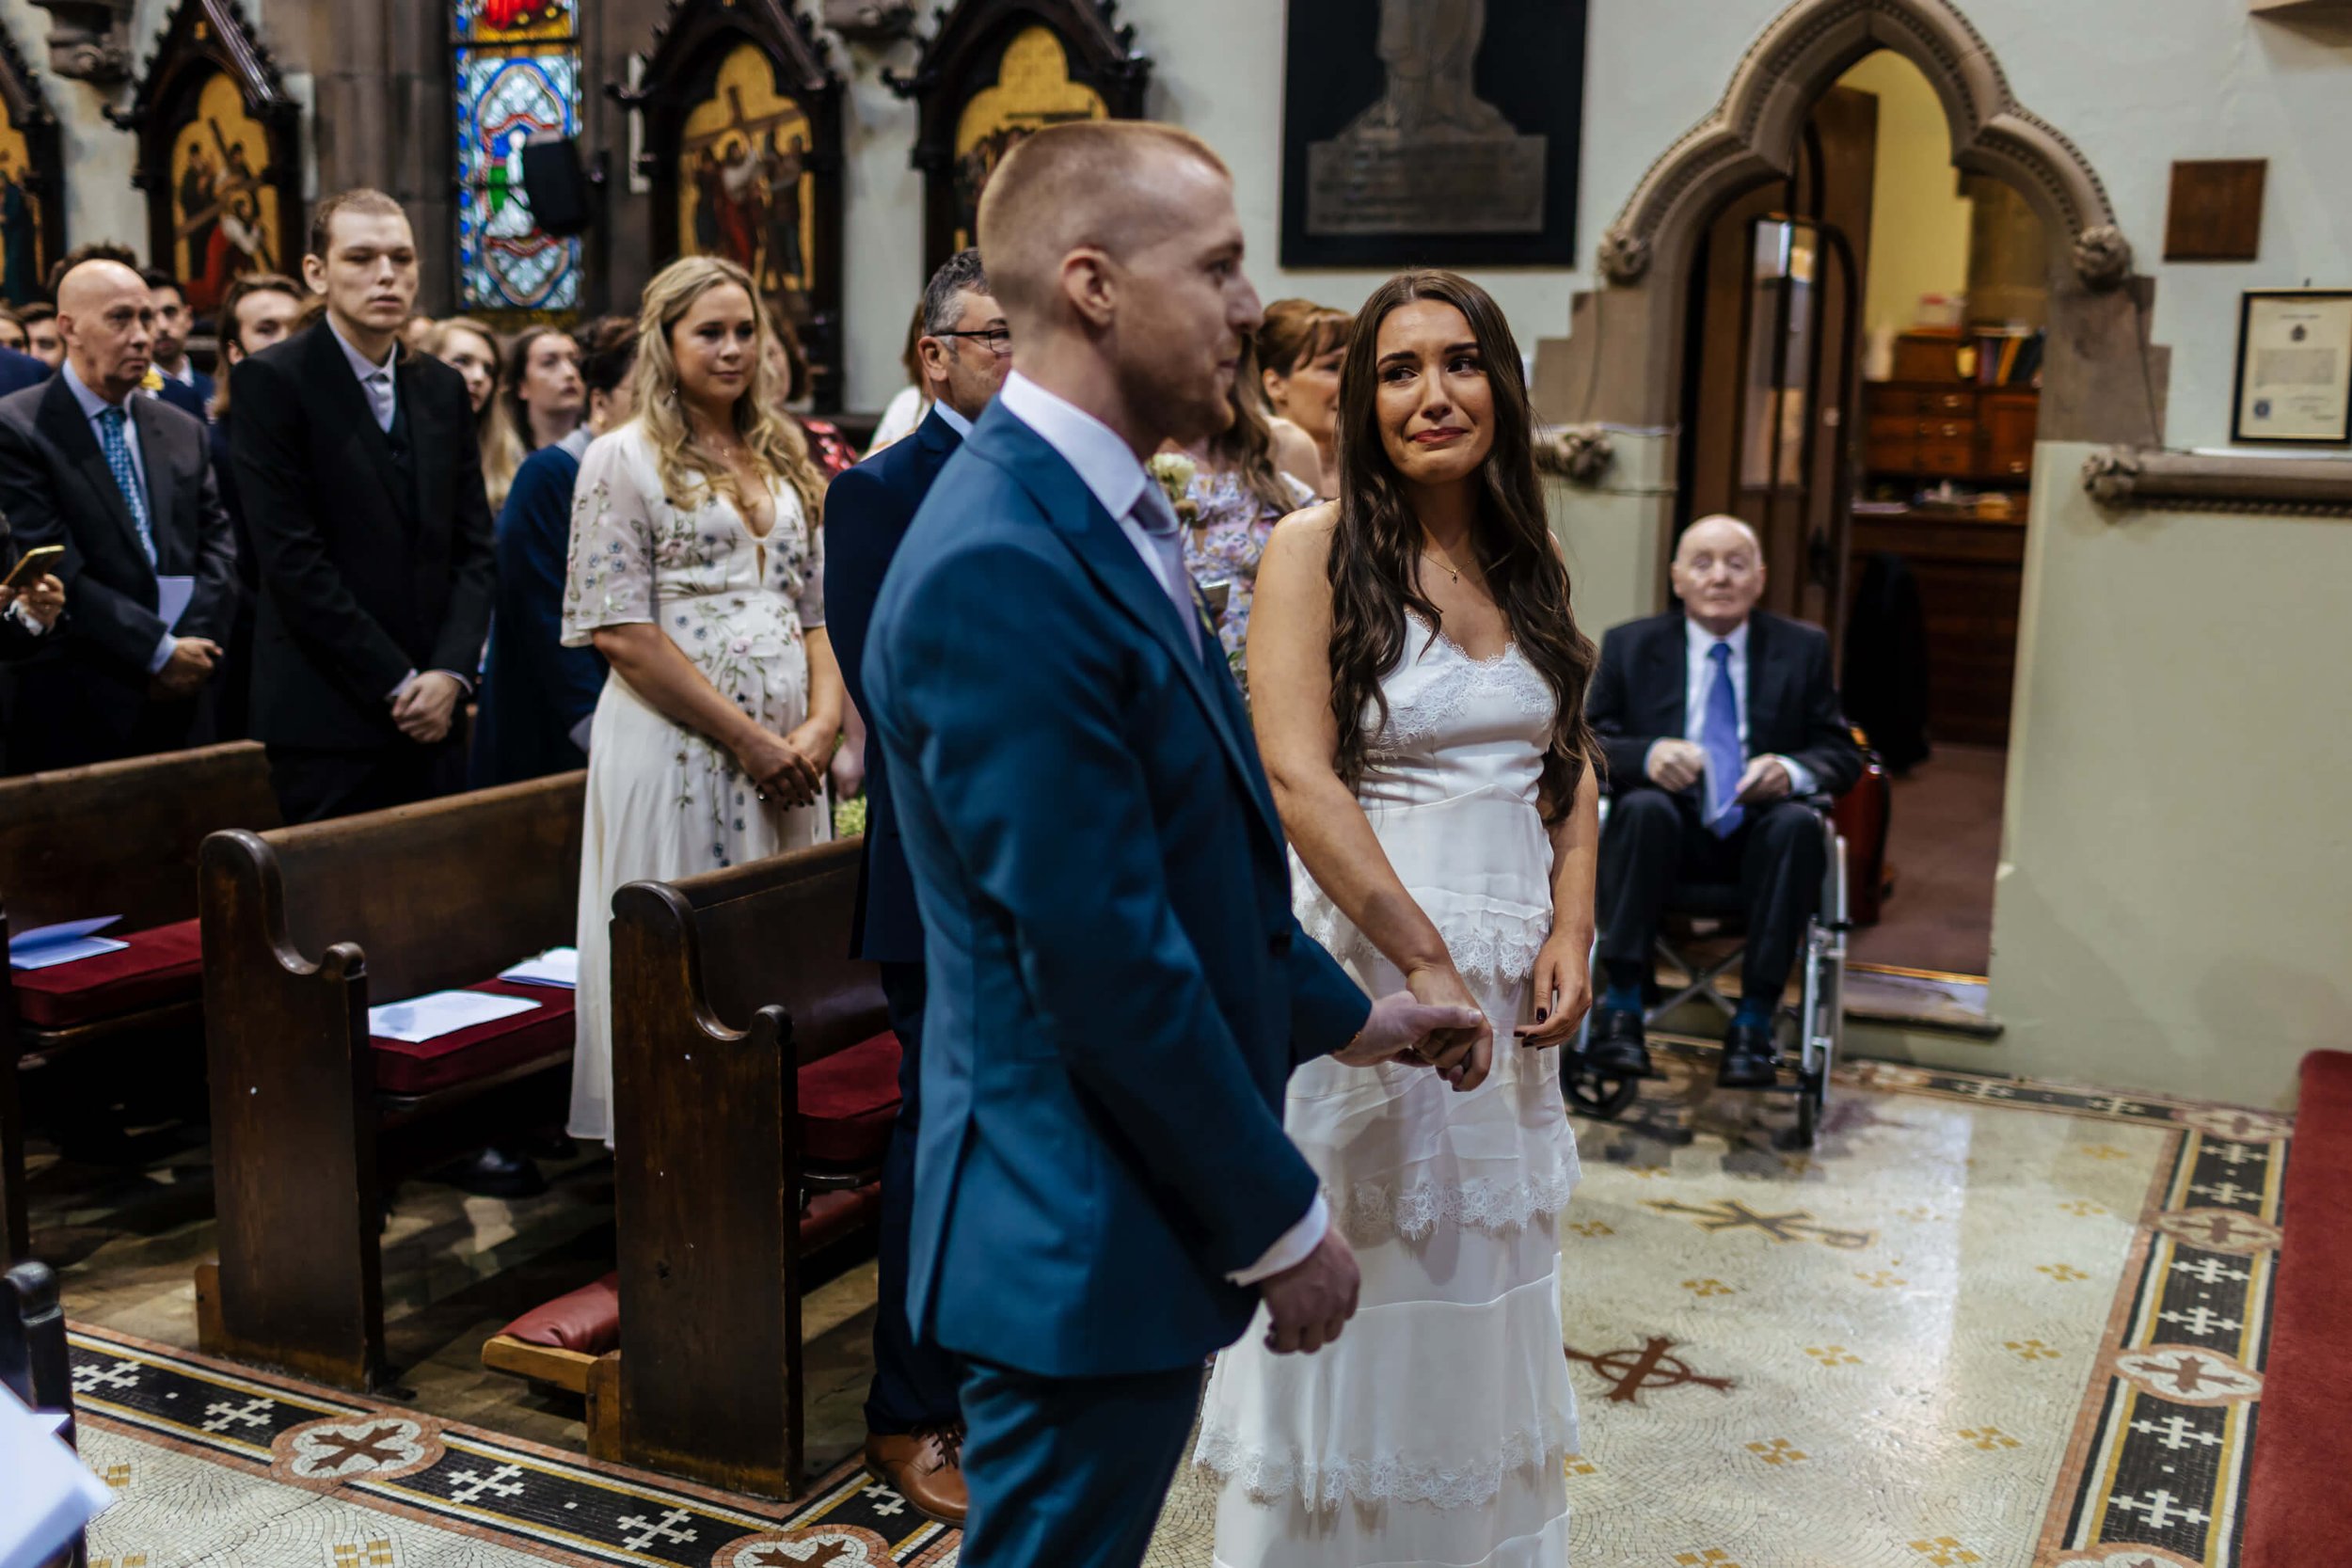 The bride getting emotional during her church wedding